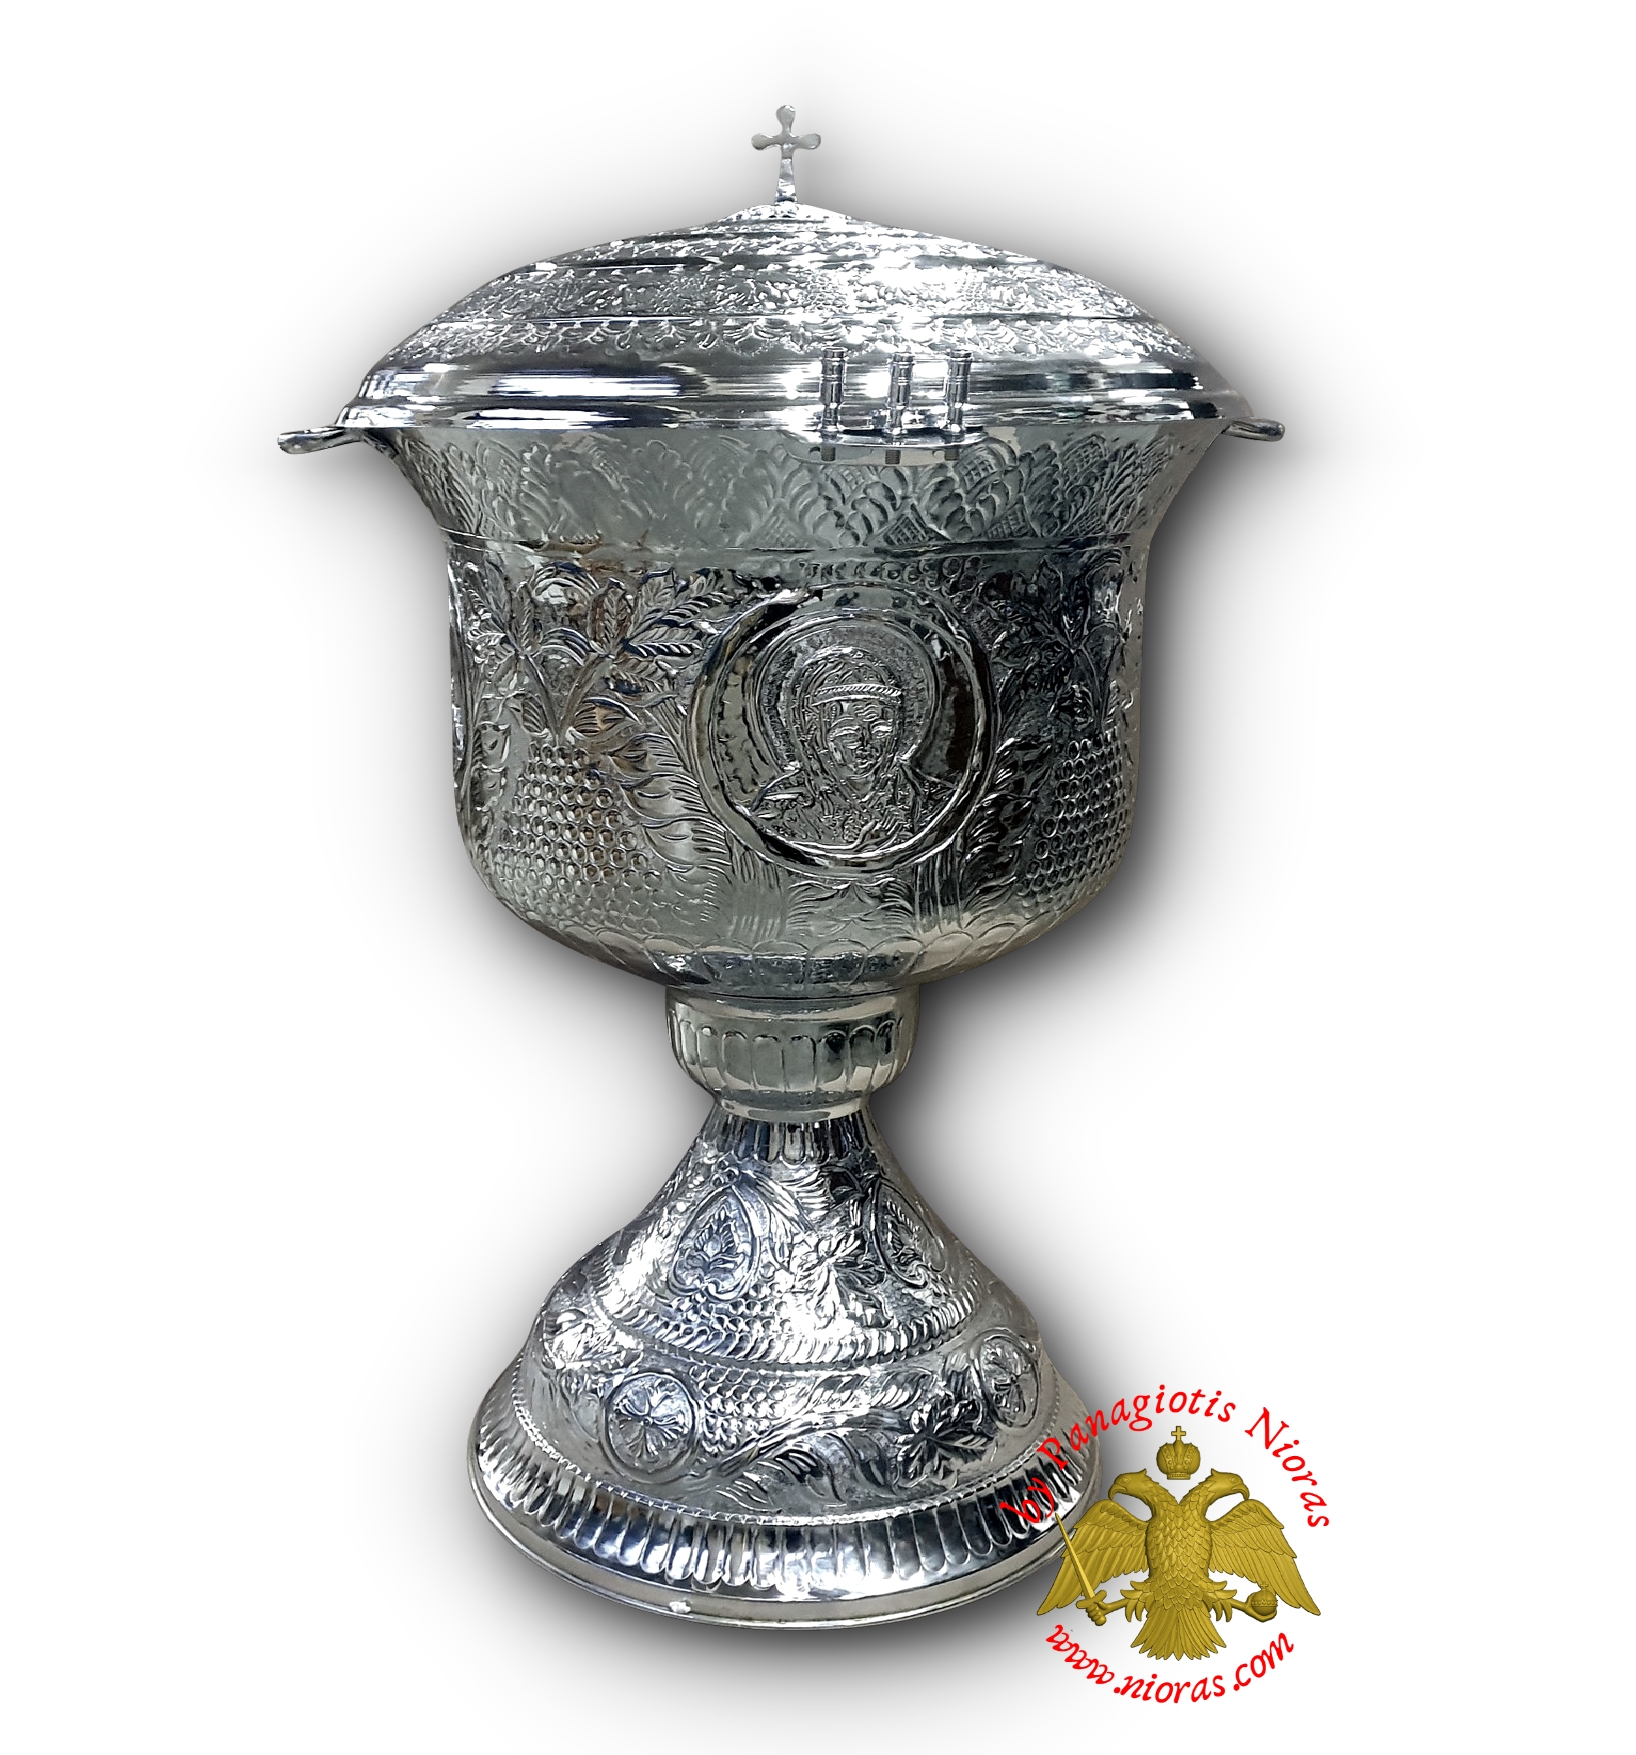 Hand Carved Baptismal Font with Holy Icons in the Body and Cover Lid Nickel Plated